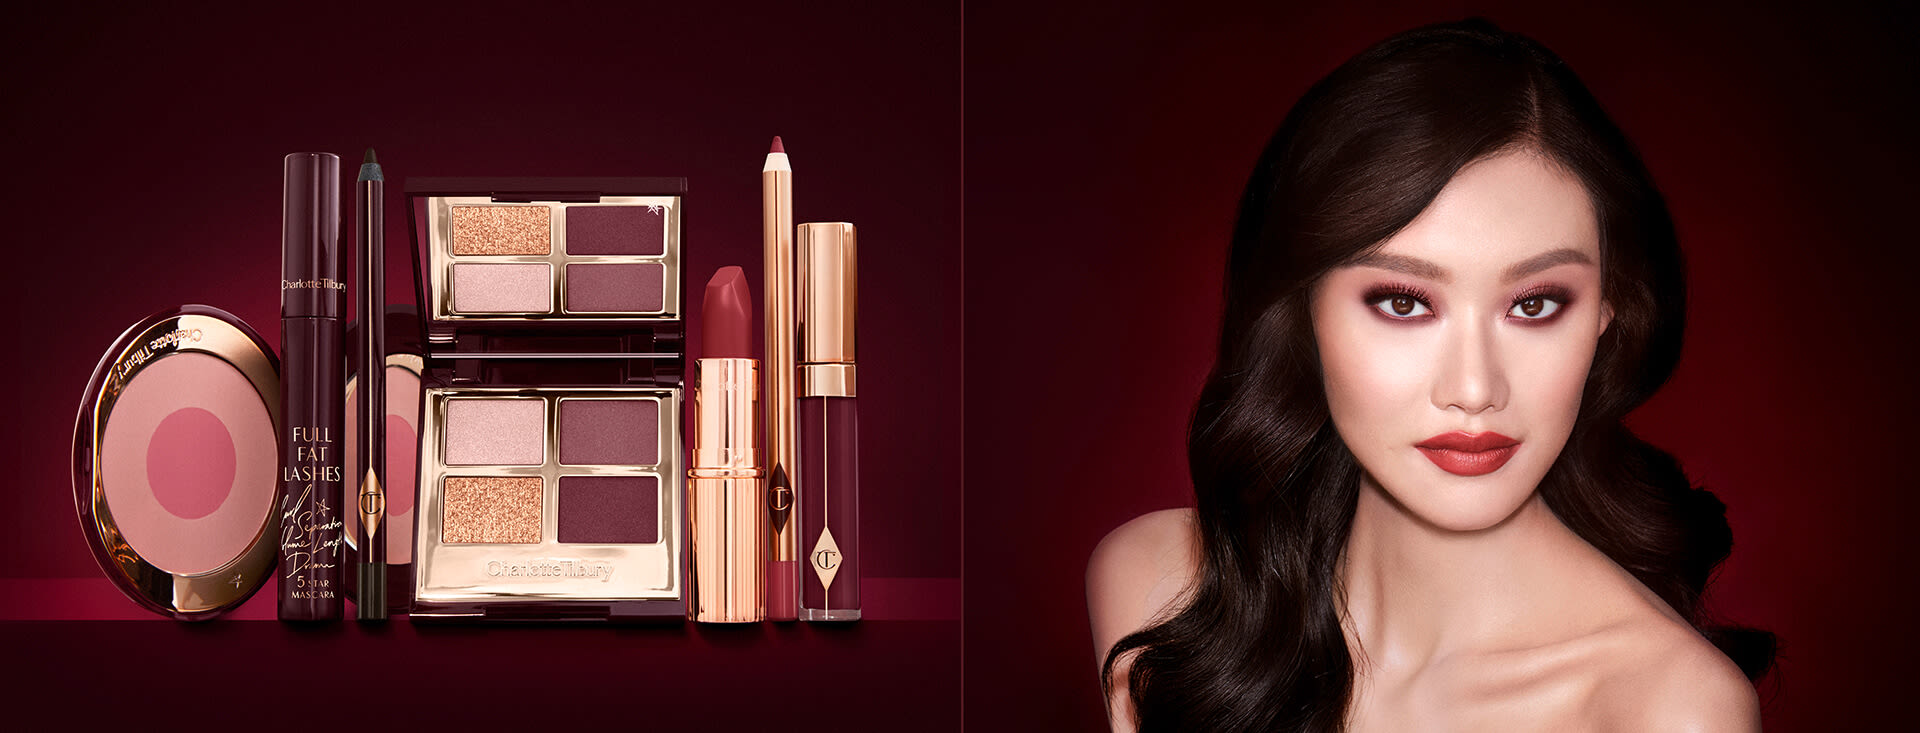 A fair-tone model with brown eyes wearing reddish-plum eye makeup, glowy face base, and a vampy-red lipstick with a satin-finish, along with an open, mirrored-lid eyeshadow palette in matte and shimmery gold and red shades, an open black eyeliner pencil, a mascara in a dark-crimson colour scheme, a red lipstick with a matching lip liner pencil, vampy-red lip gloss, and an open two-tone blush in cool pink. 